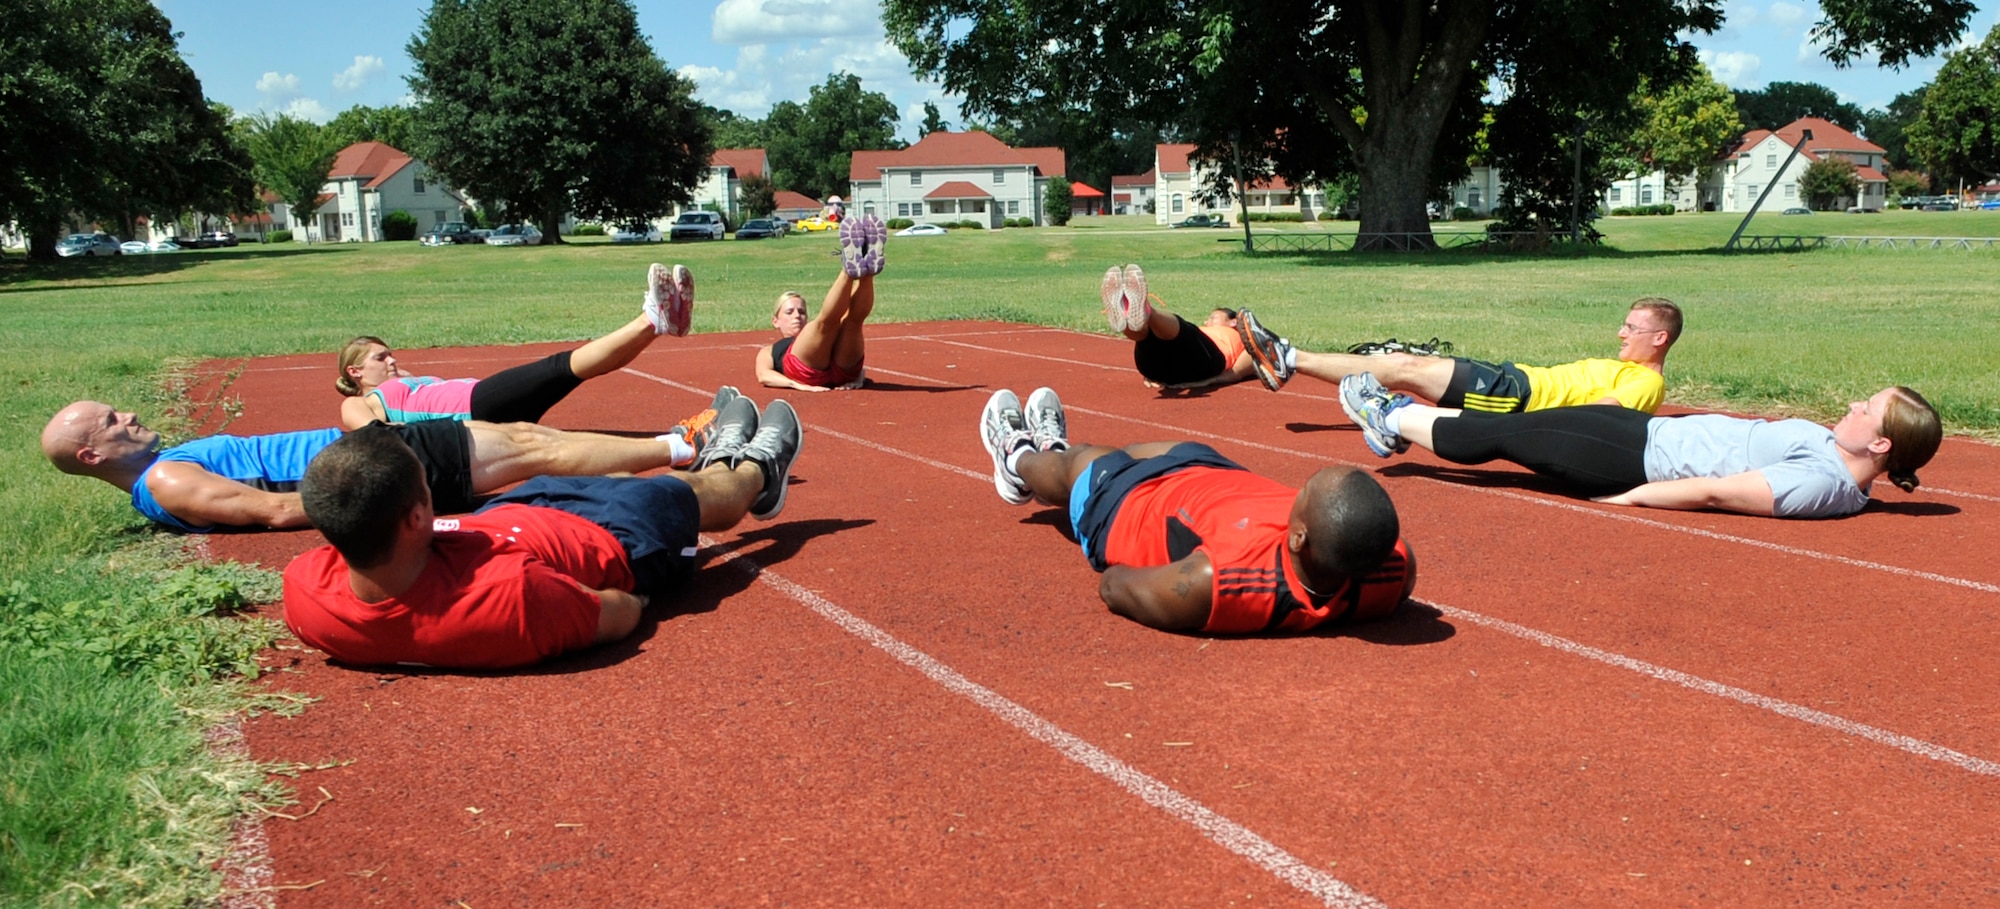 Airmen perform calisthenics during a class as part of the BE-WELL program on Barksdale Air Force Base, Aug. 12, 2013. BE-WELL is acronymic for "Balanced Eating, Working out Effectively; Live a long, healthy and productive Life," and was designed to replace the Healthy Living Program. (U.S. Air Force photo/Airman 1st Class Benjamin Raughton) 